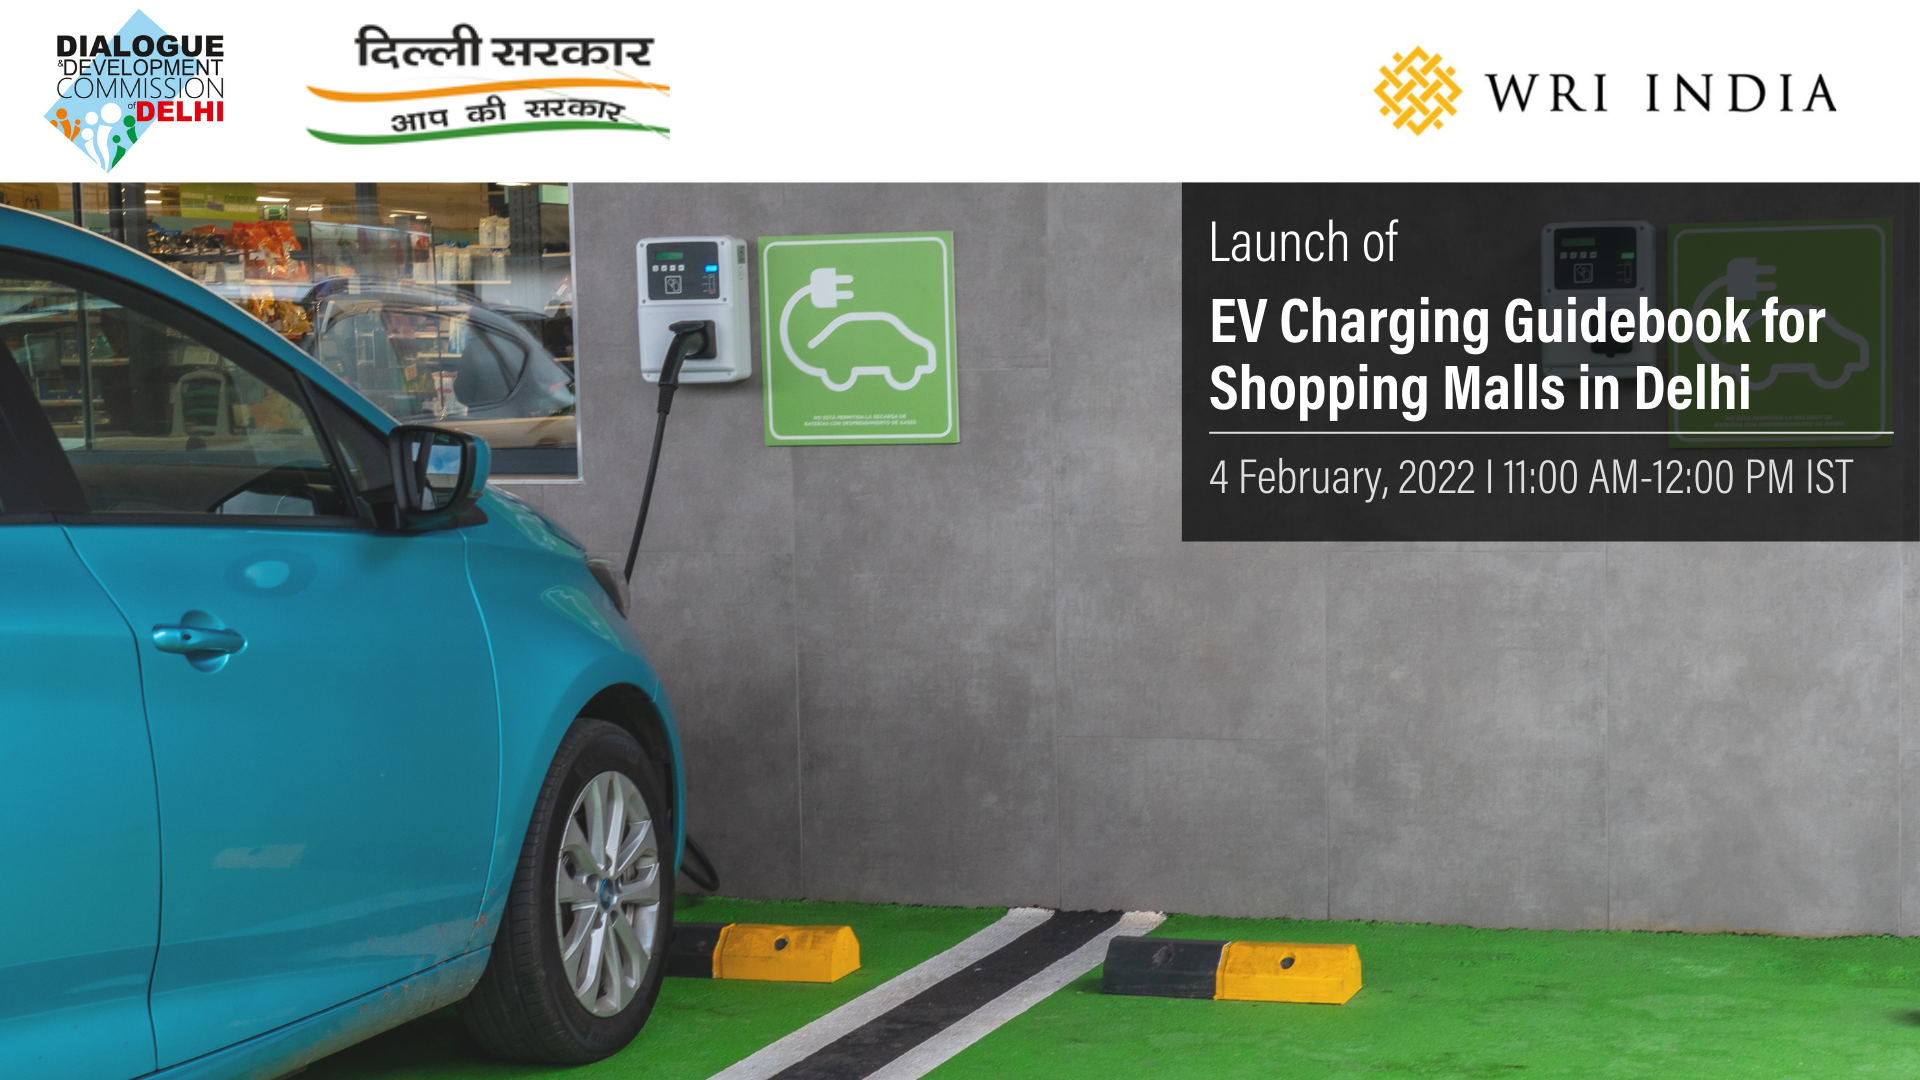 EV%20Charging%20Guidebook%20for%20Shopping%20Malls%20in%20Delhi-%20Twitter%20.png